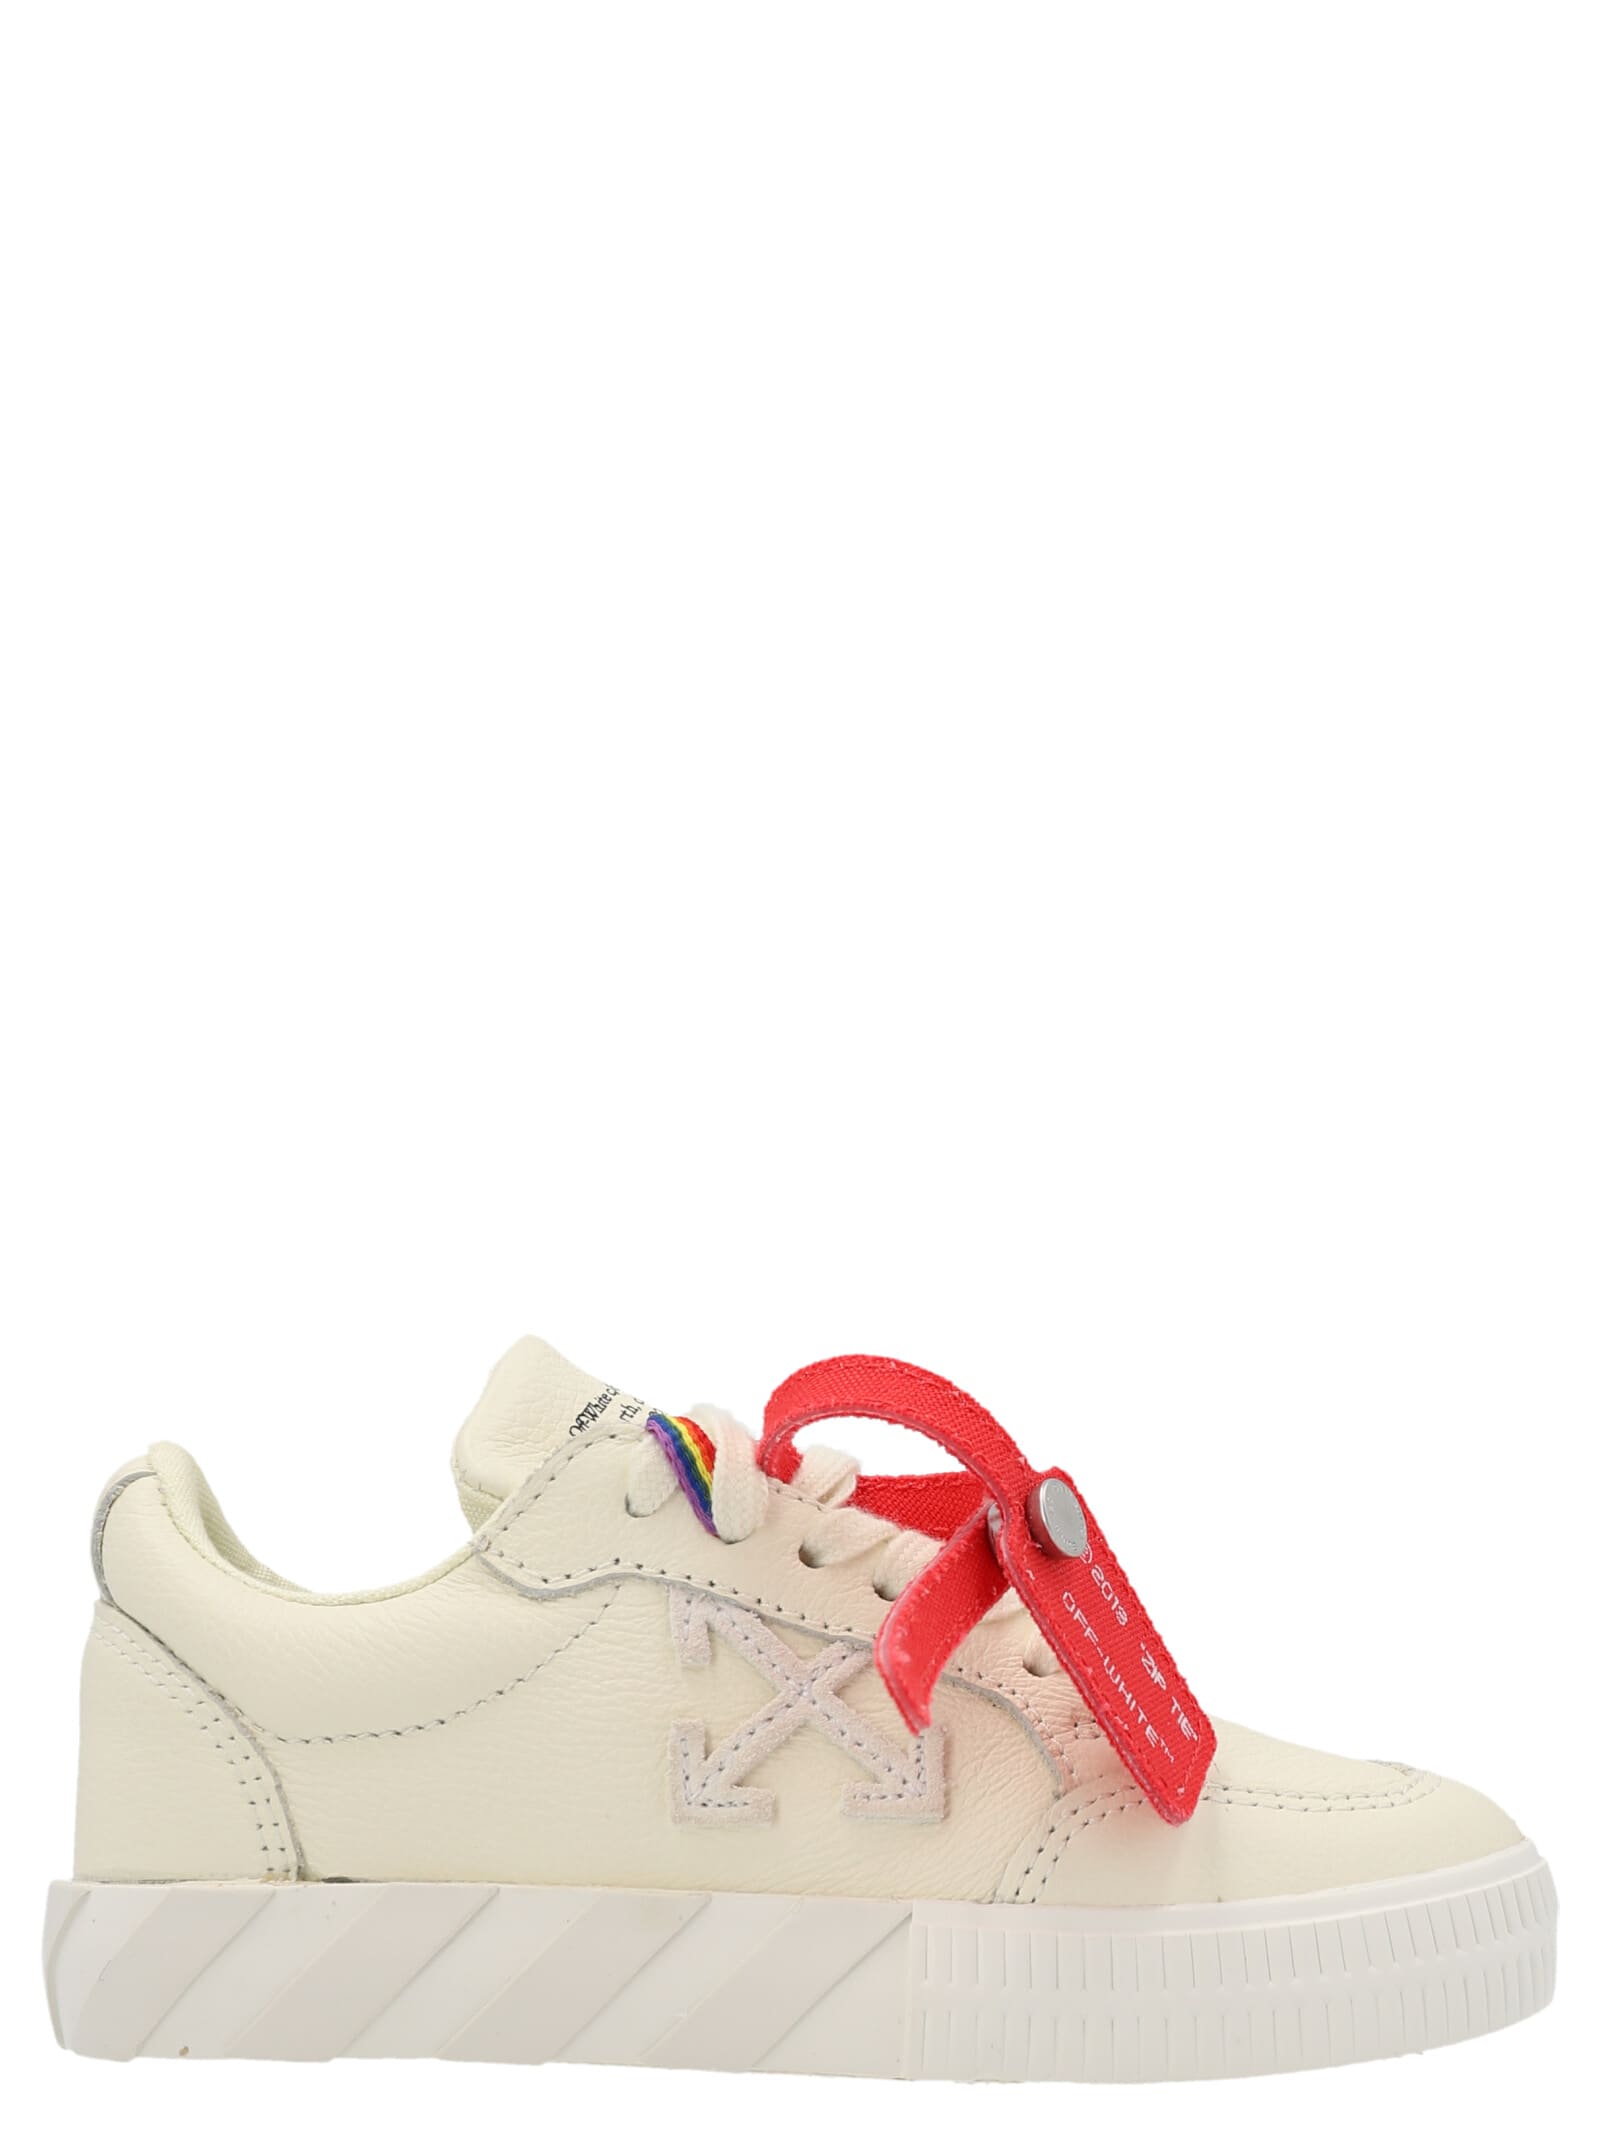 Off-White vulcanized Lace Up Sneakers